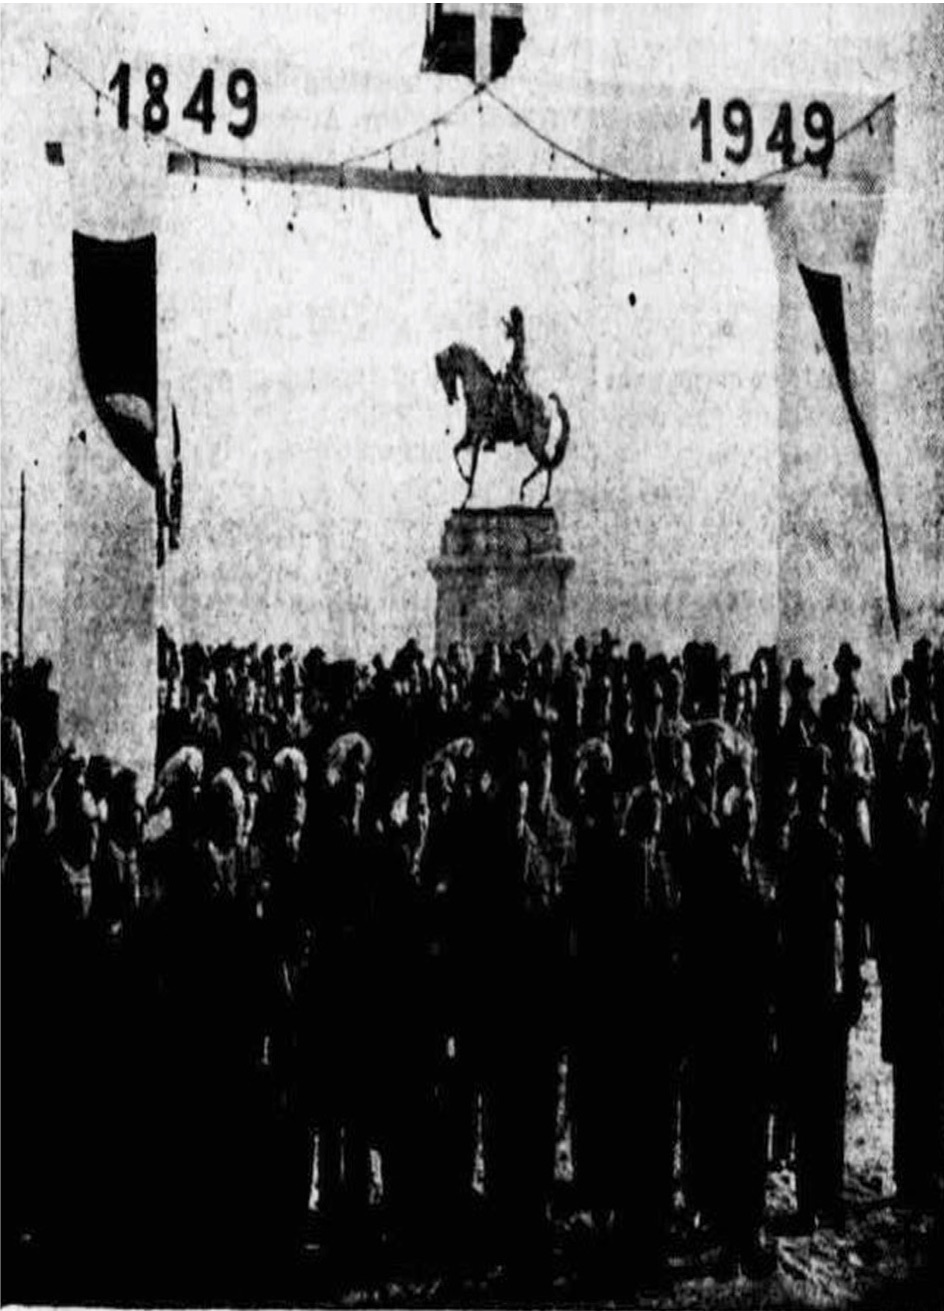 The official unveiling of the statue took place in Kavala on December 6, 1949, ELIA Archive